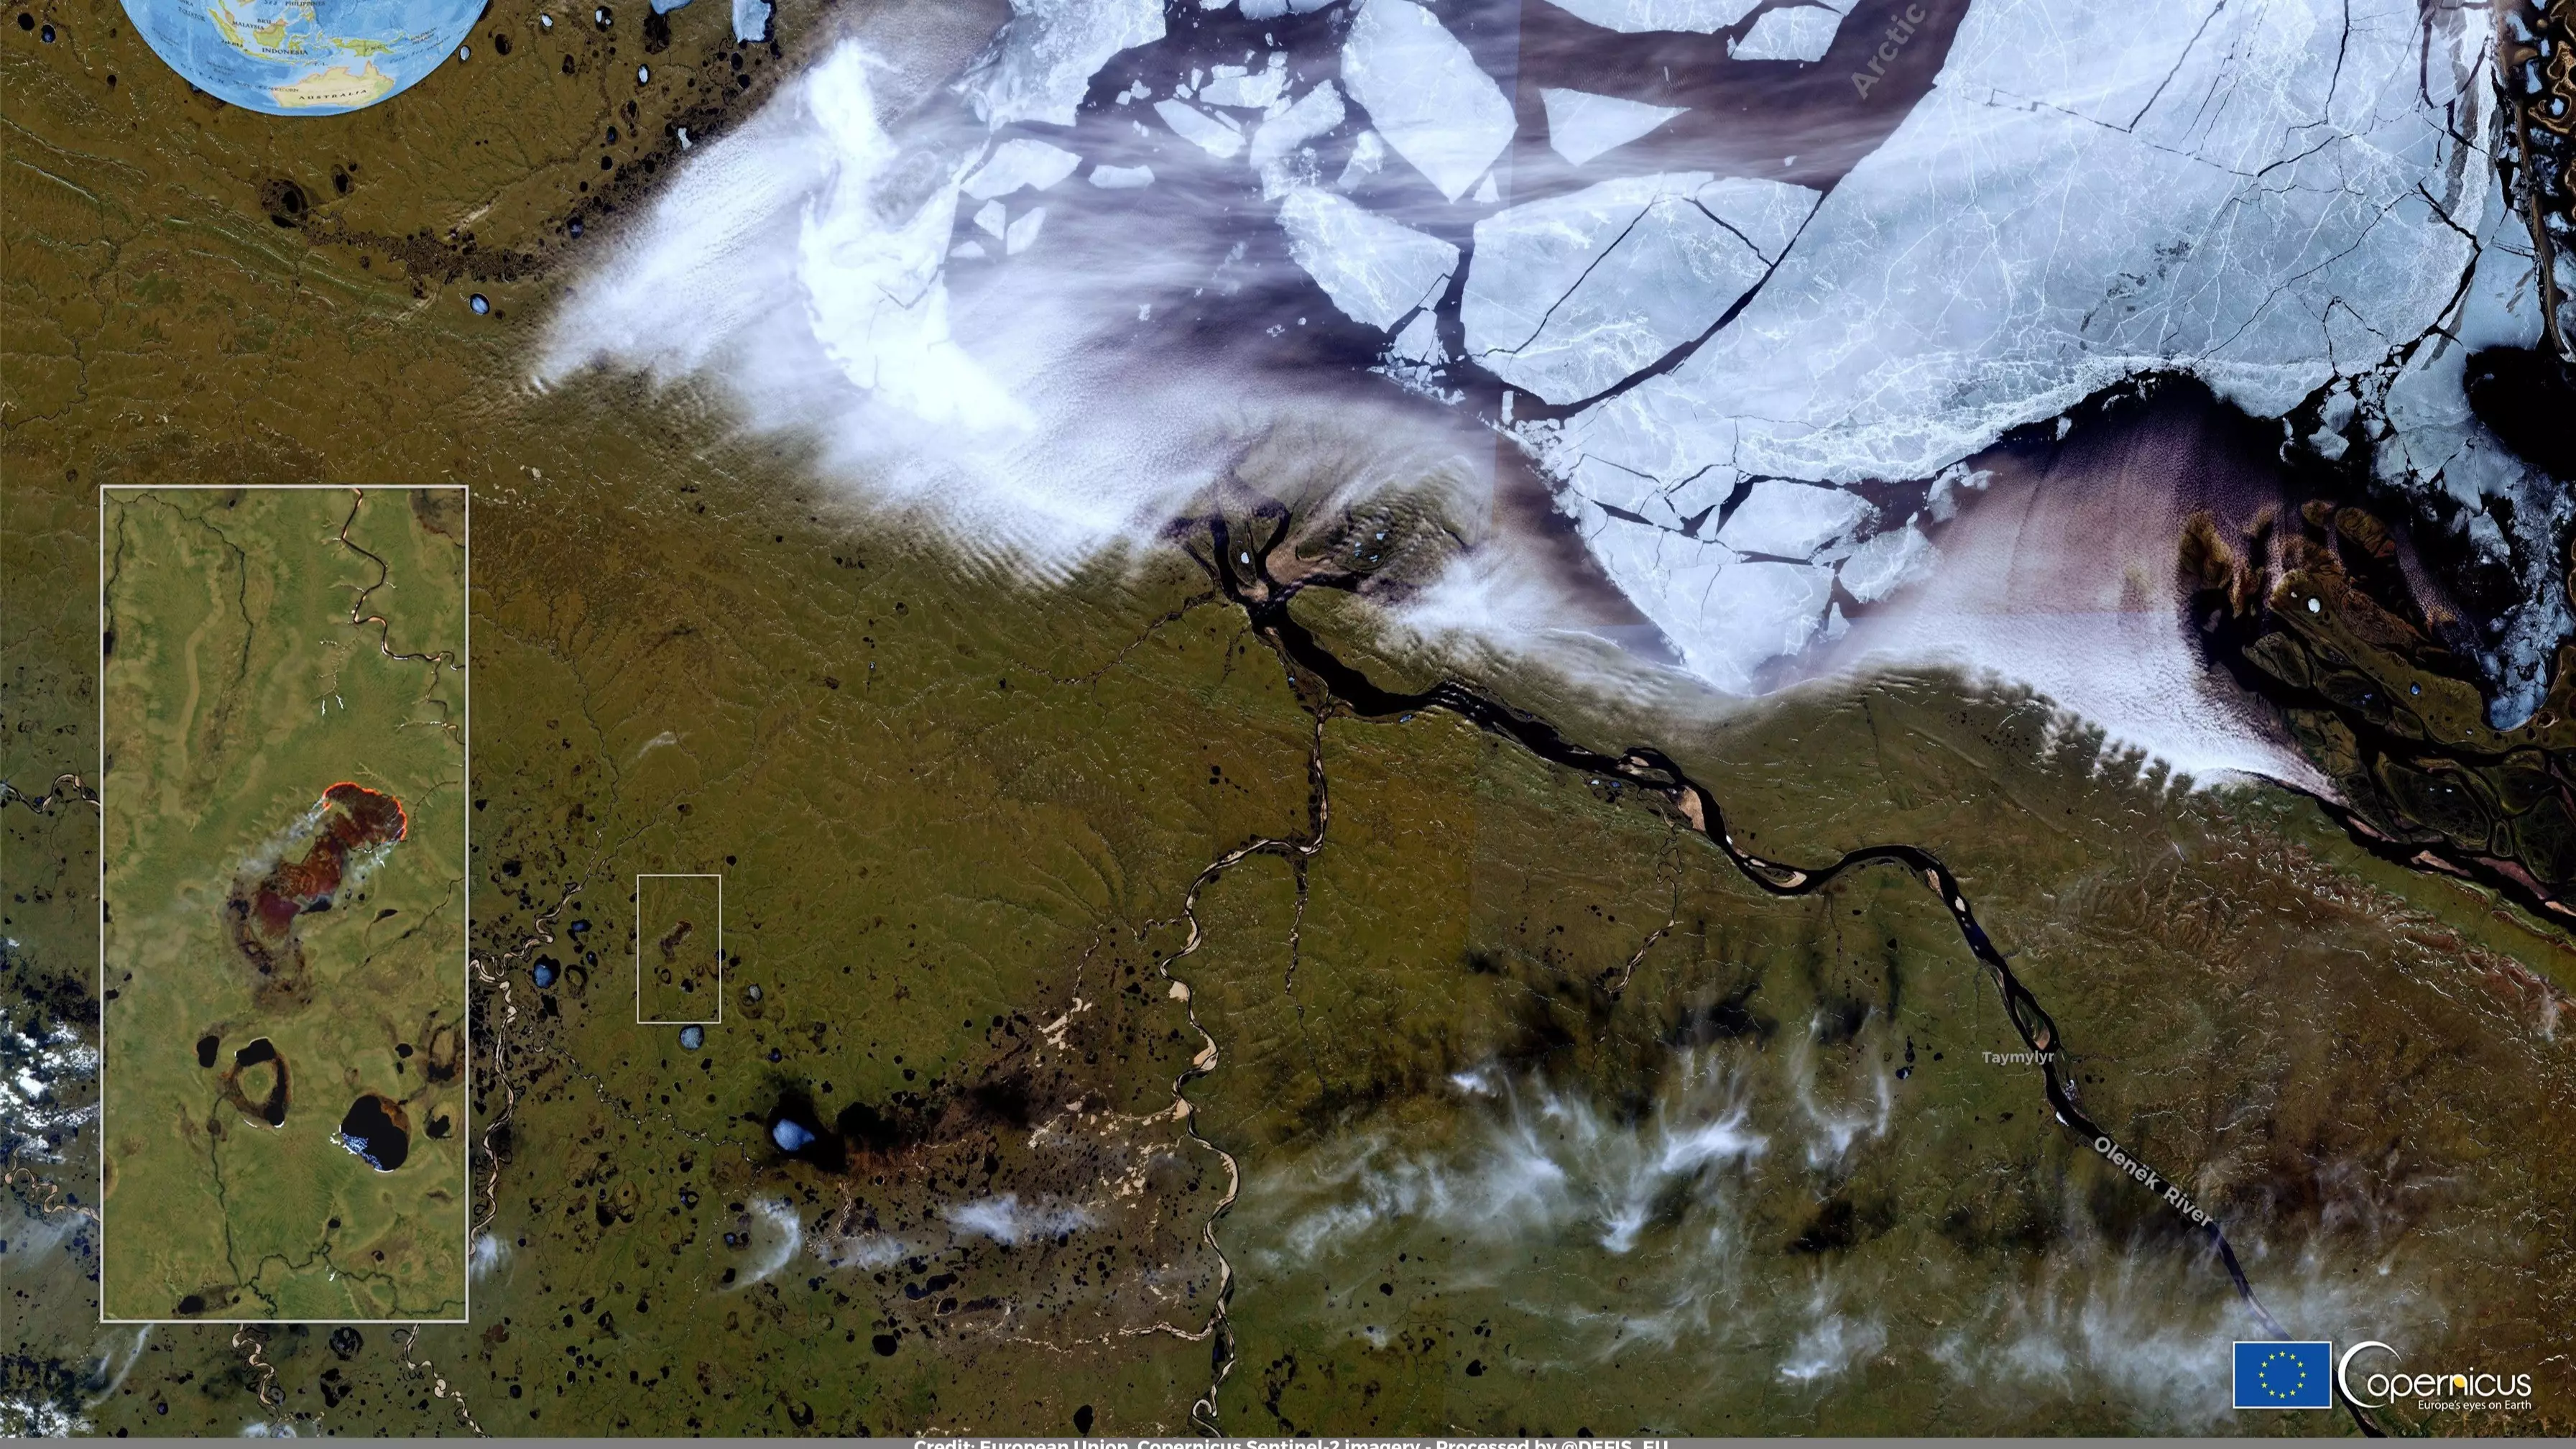 Satellite Images Show Raging Wildfires Around 30 Miles From The Arctic Ocean